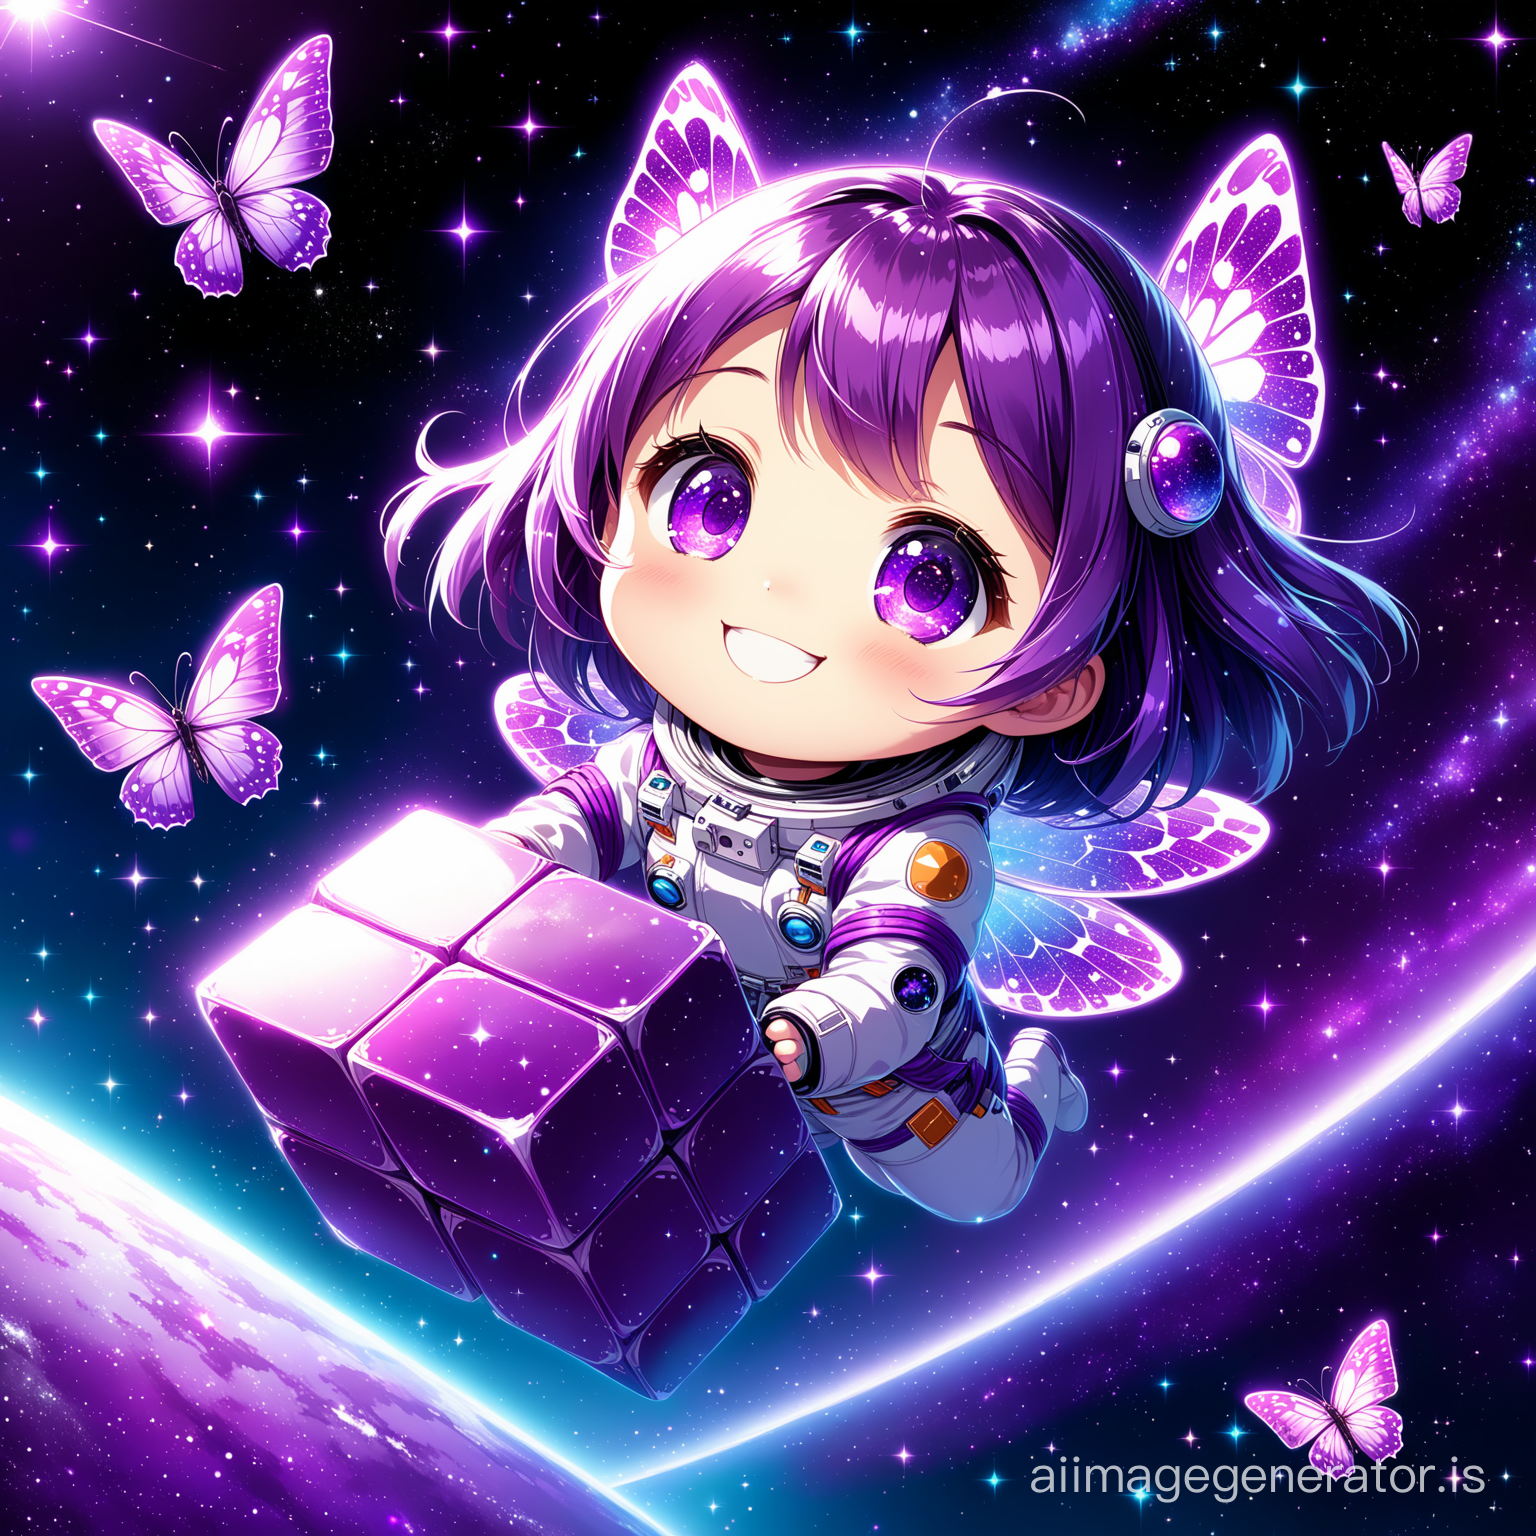 A little happy cute  little purple butterfly with purple eye and smile in space with super detail and High Quality
big and purple blocks and floating are seen everywhere
Details are evident beautifully and with great precision